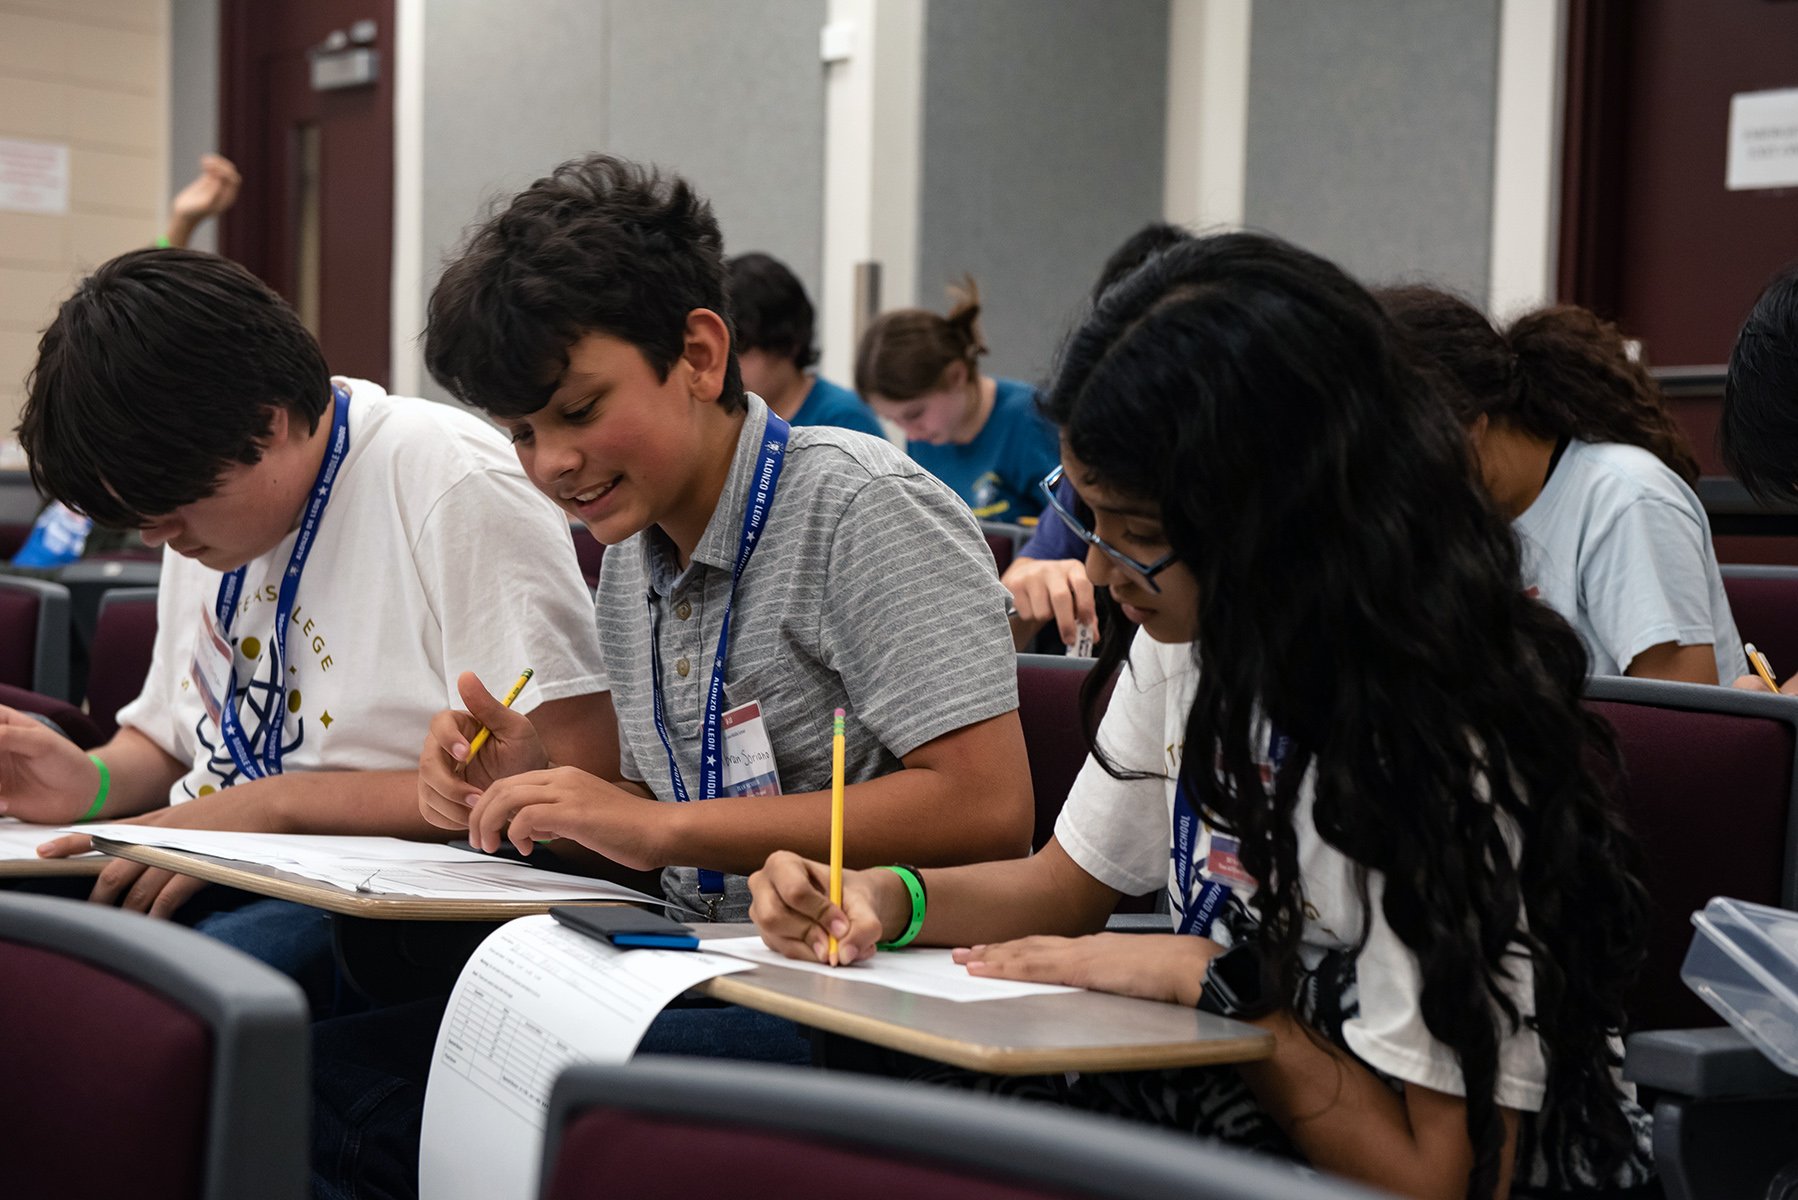 22nd Annual Texas Science Olympiad to be Hosted by Texas A&M